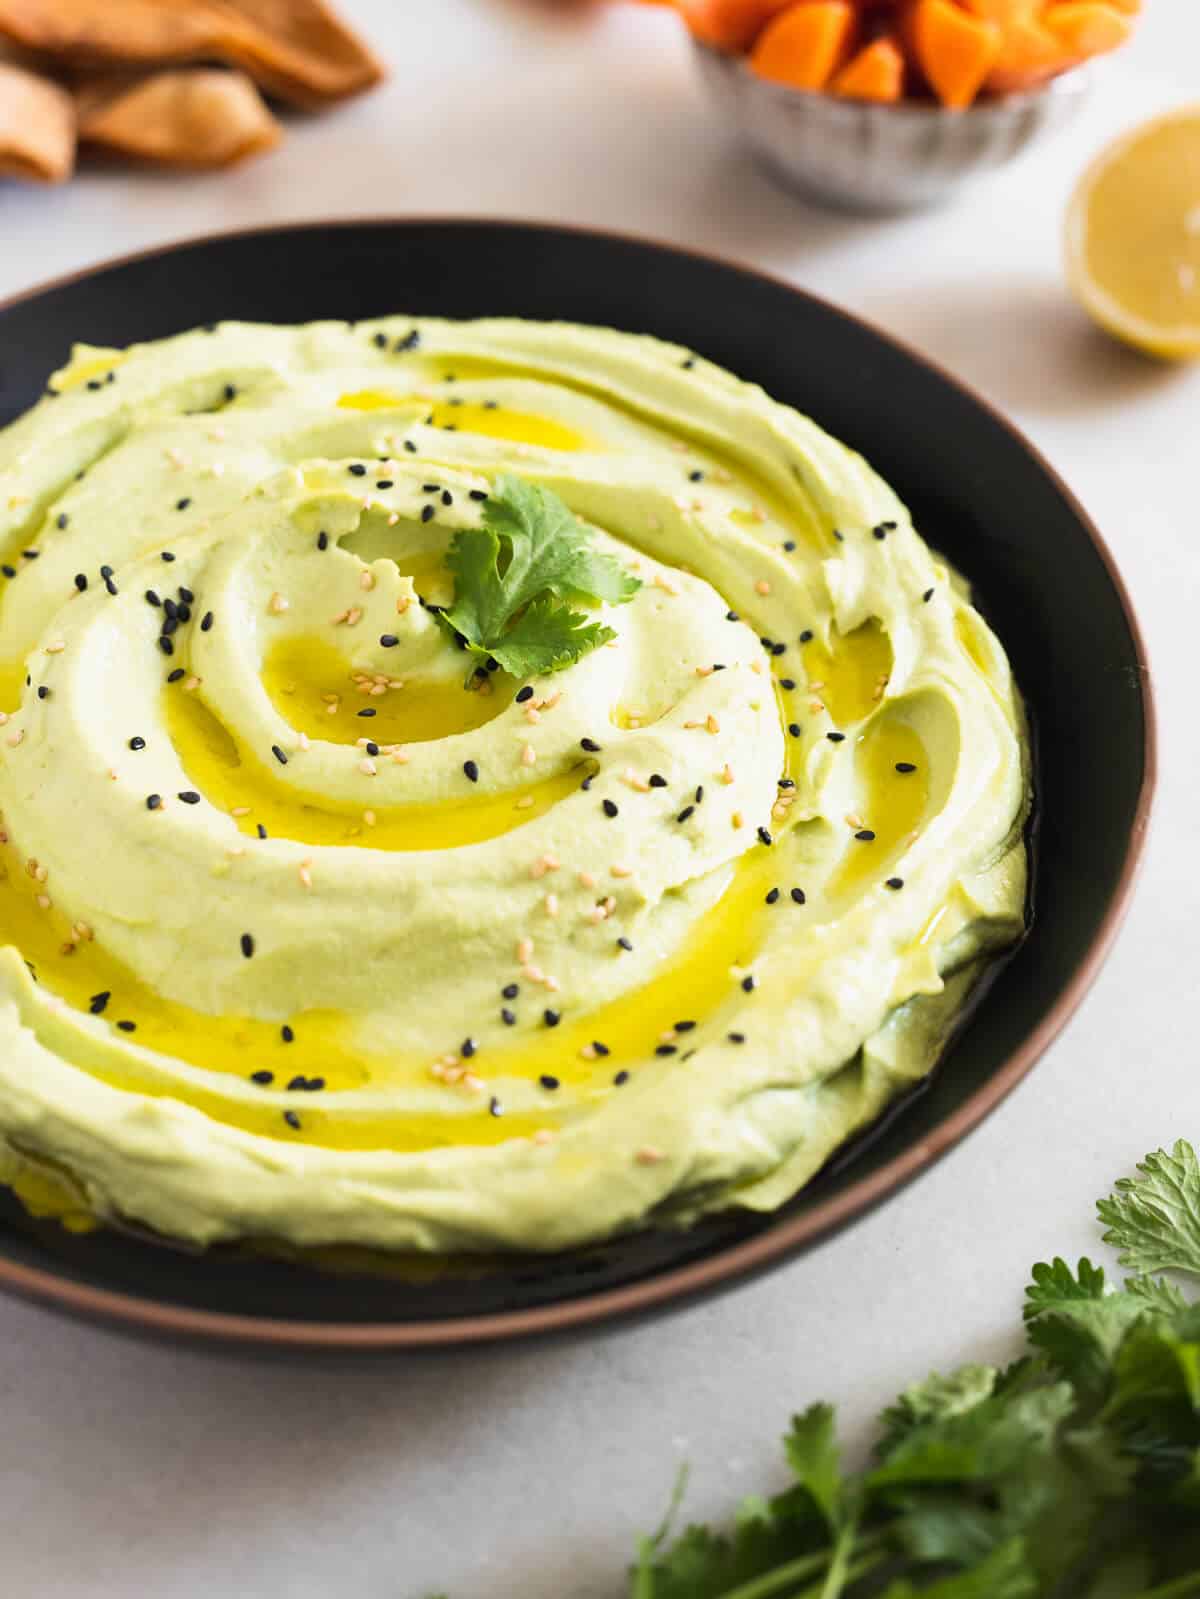 edamame hummus in a serving plate.